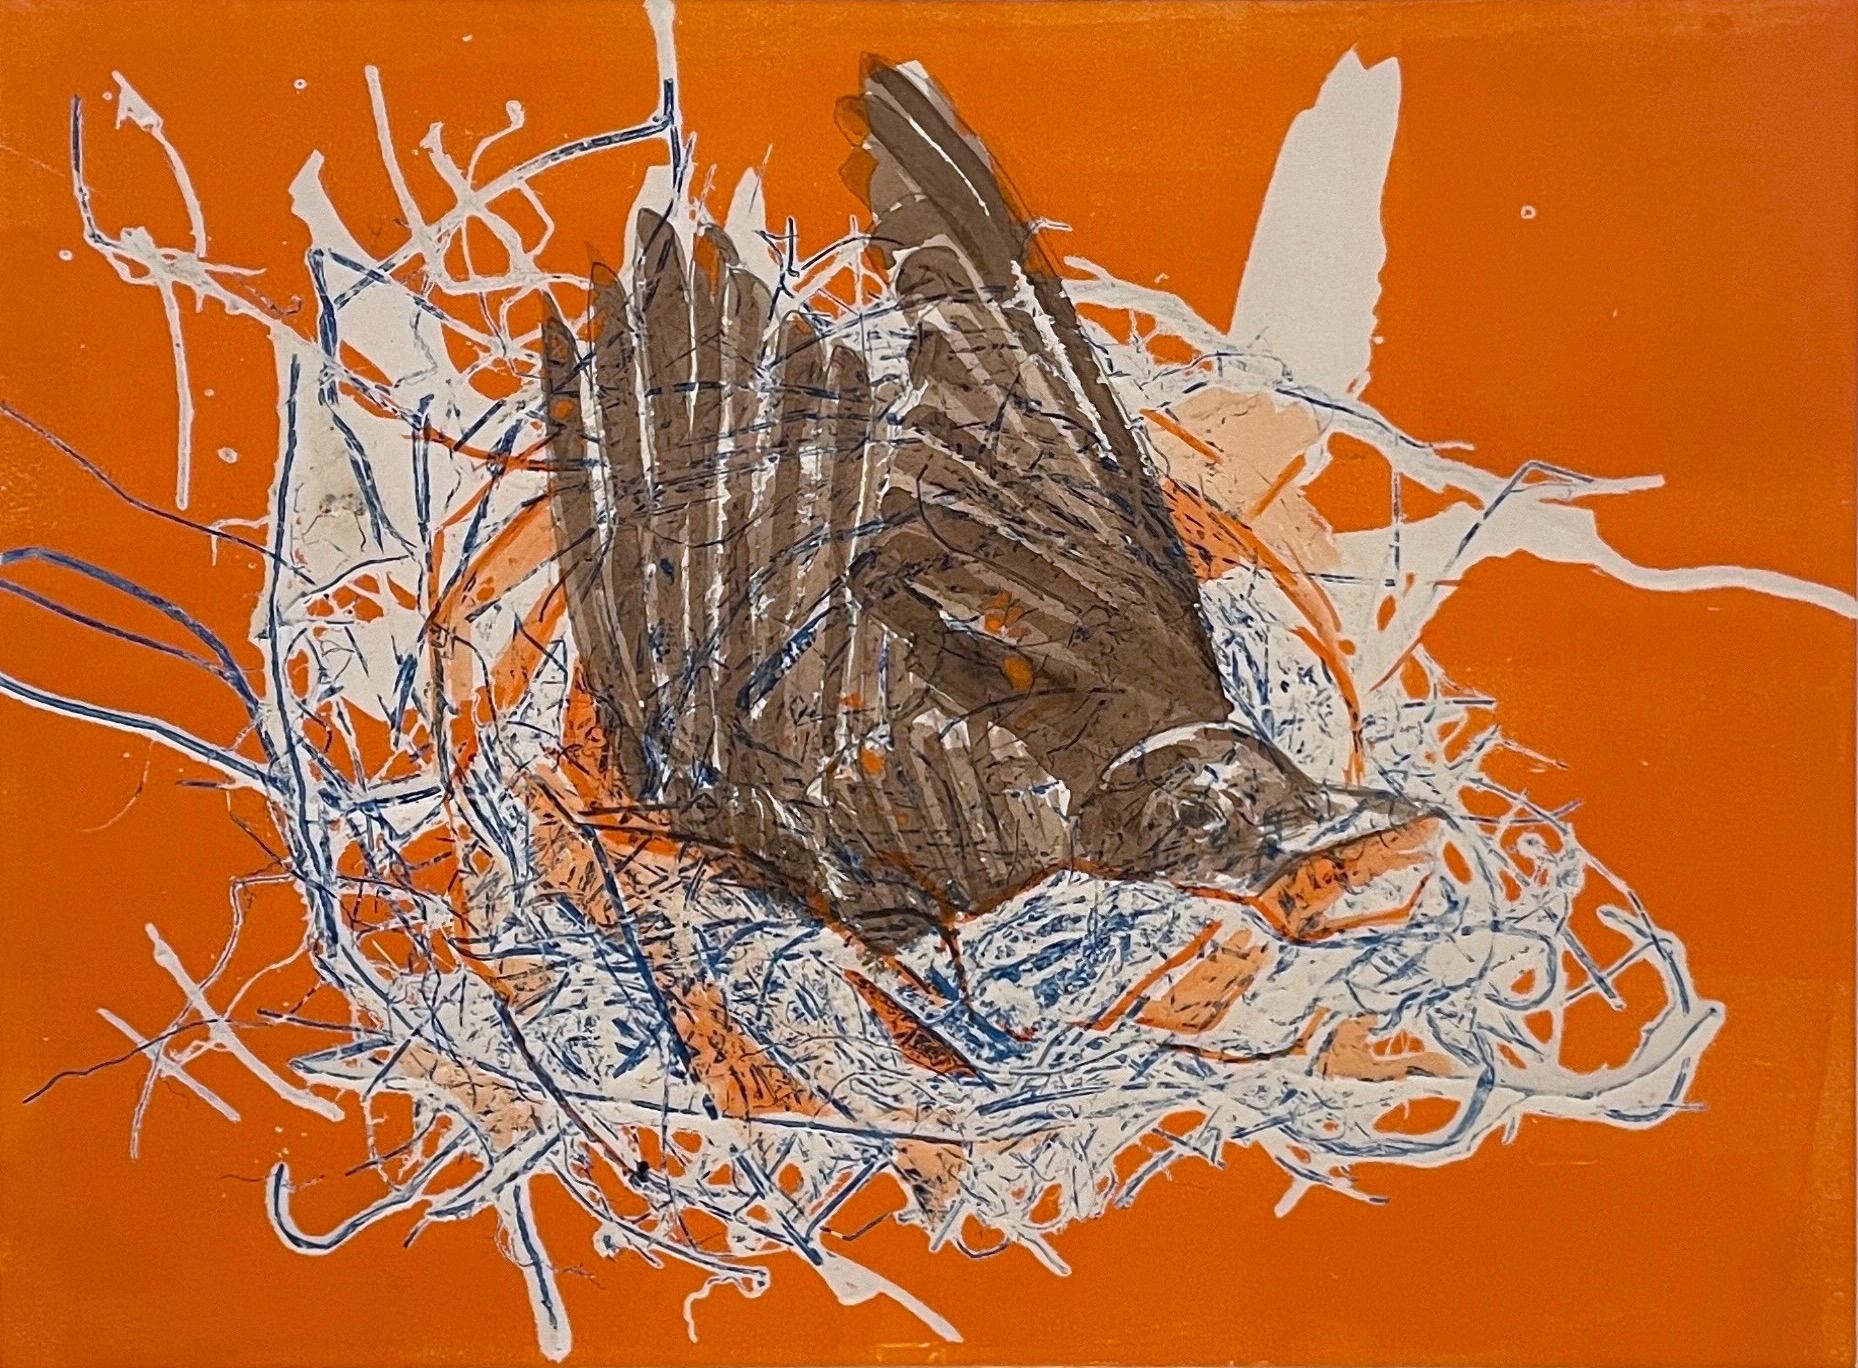 Deirdre Murphy Animal Painting - Preparation: one-of-a-kind monoprint painting of abstract bird in nest in orange